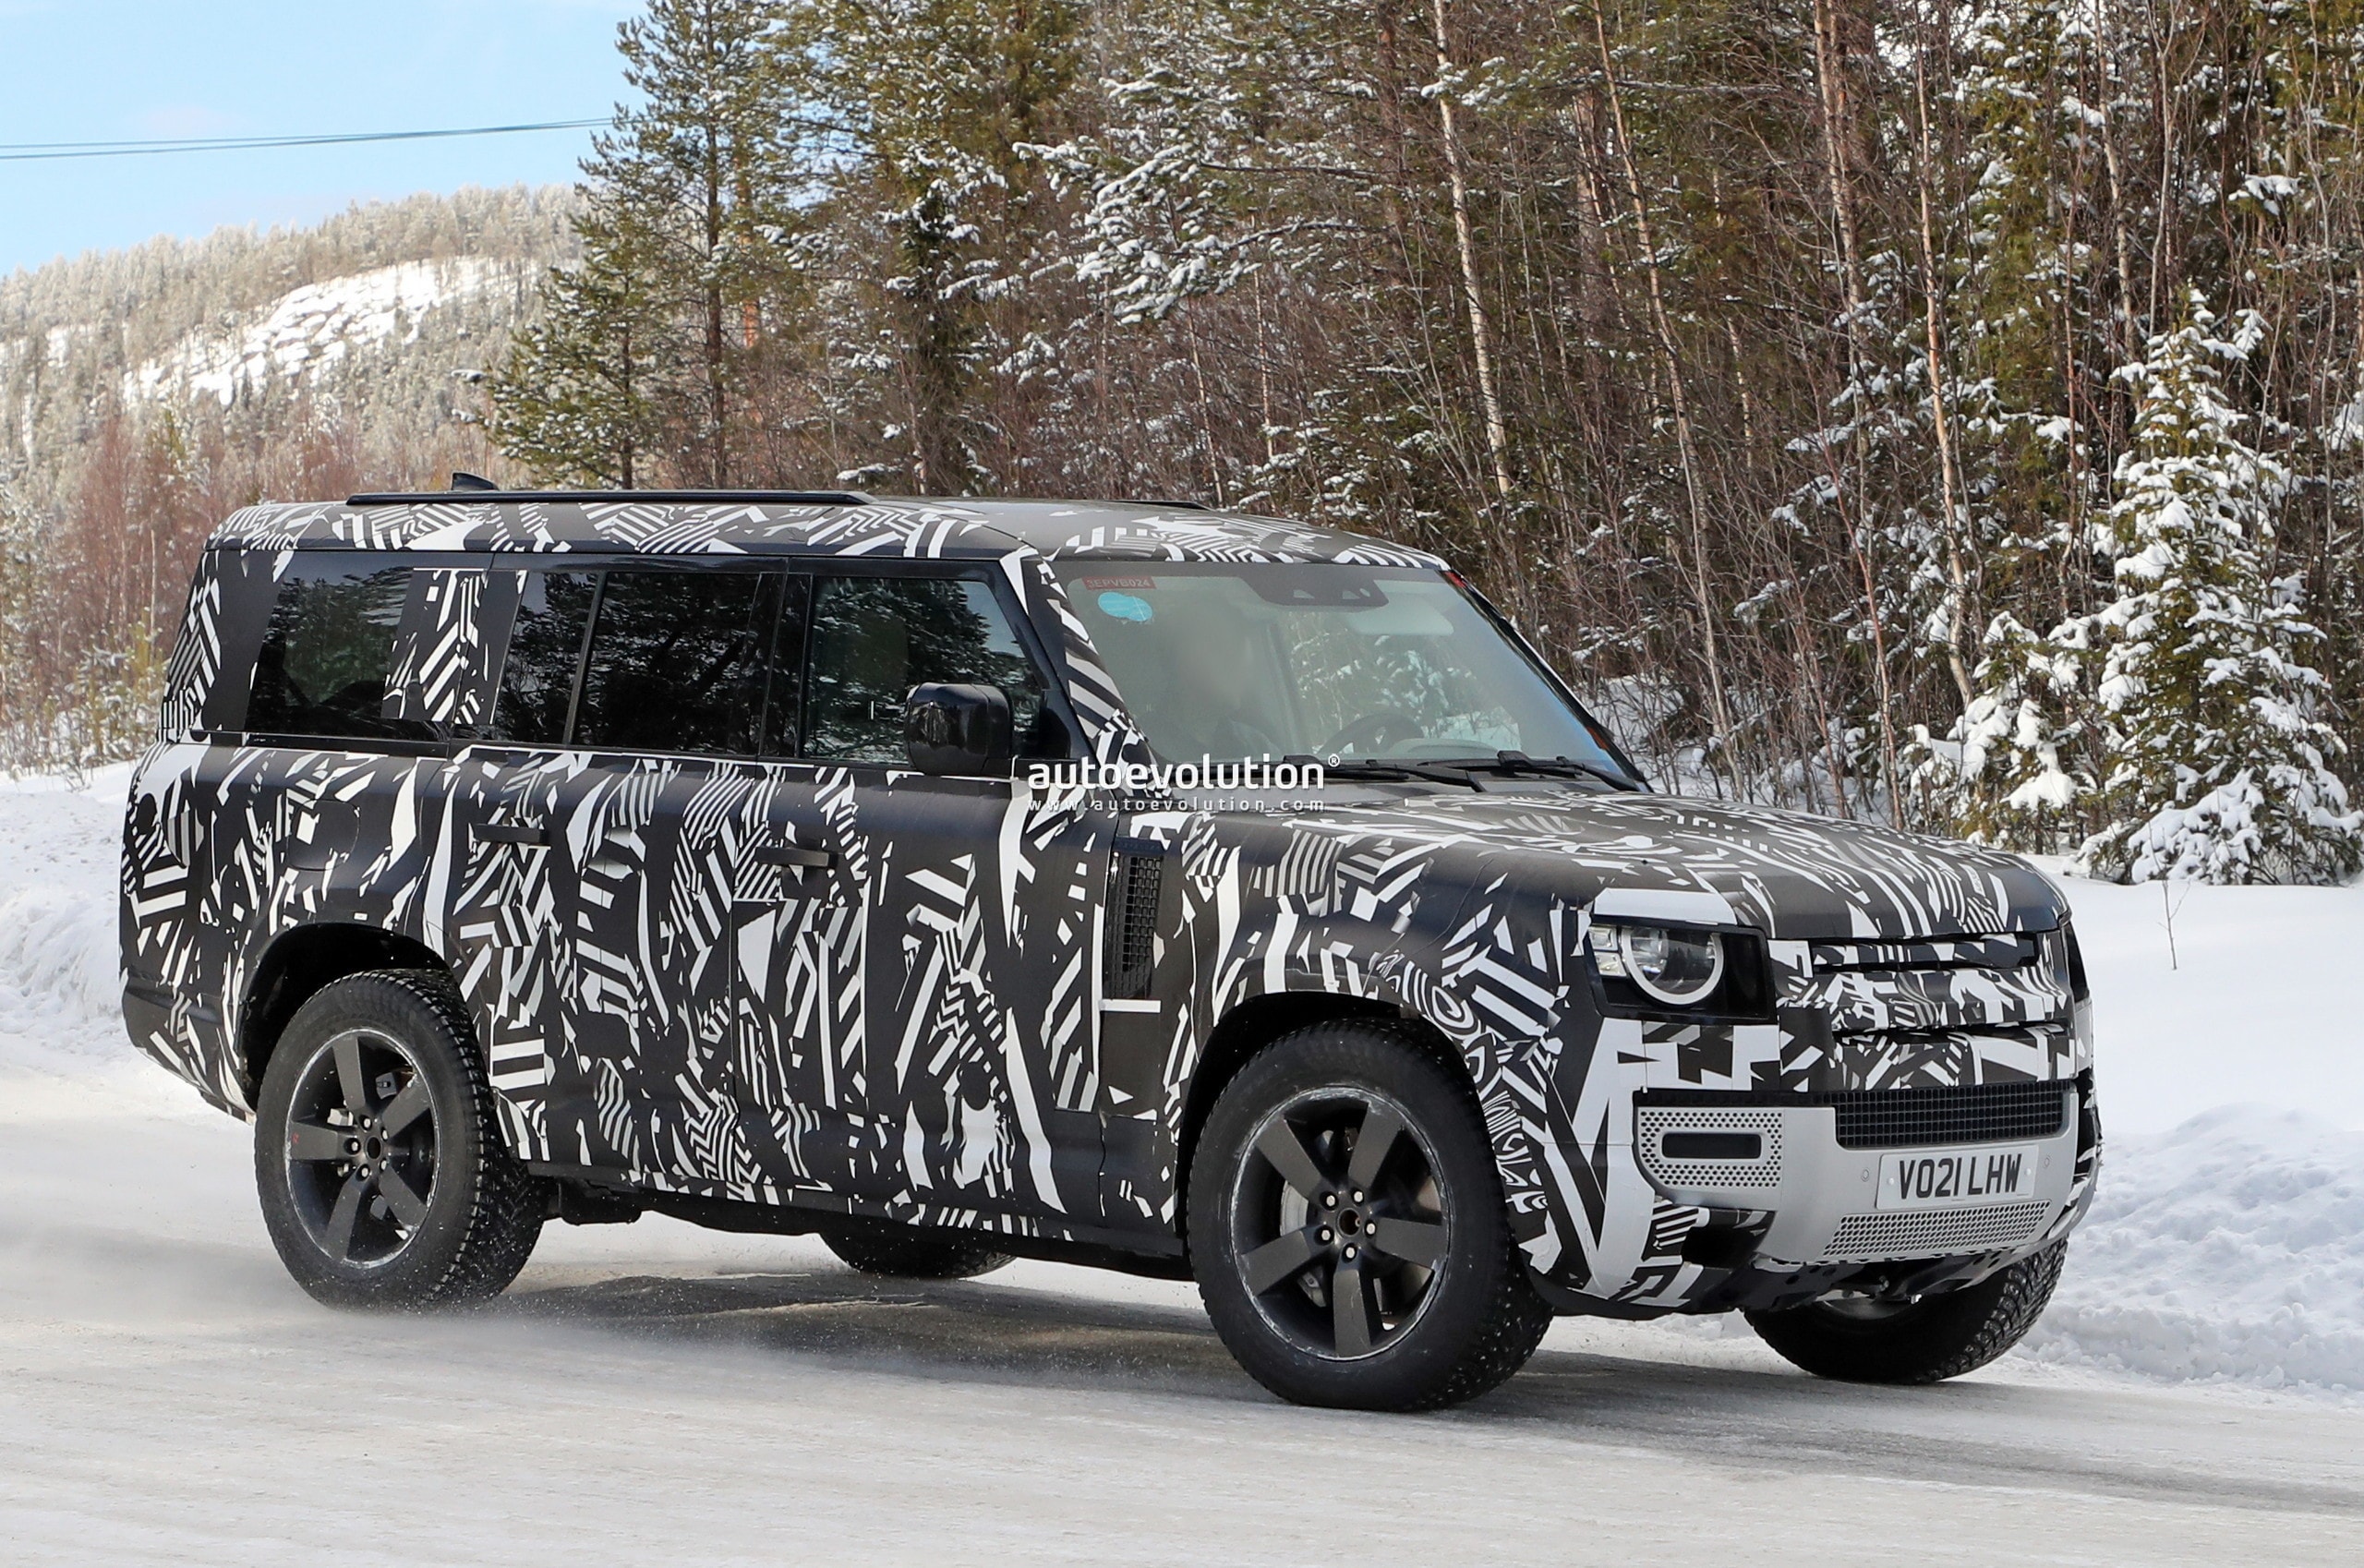 2023 Land Rover Defender 130 Review: More Space, But a Tight Squeeze